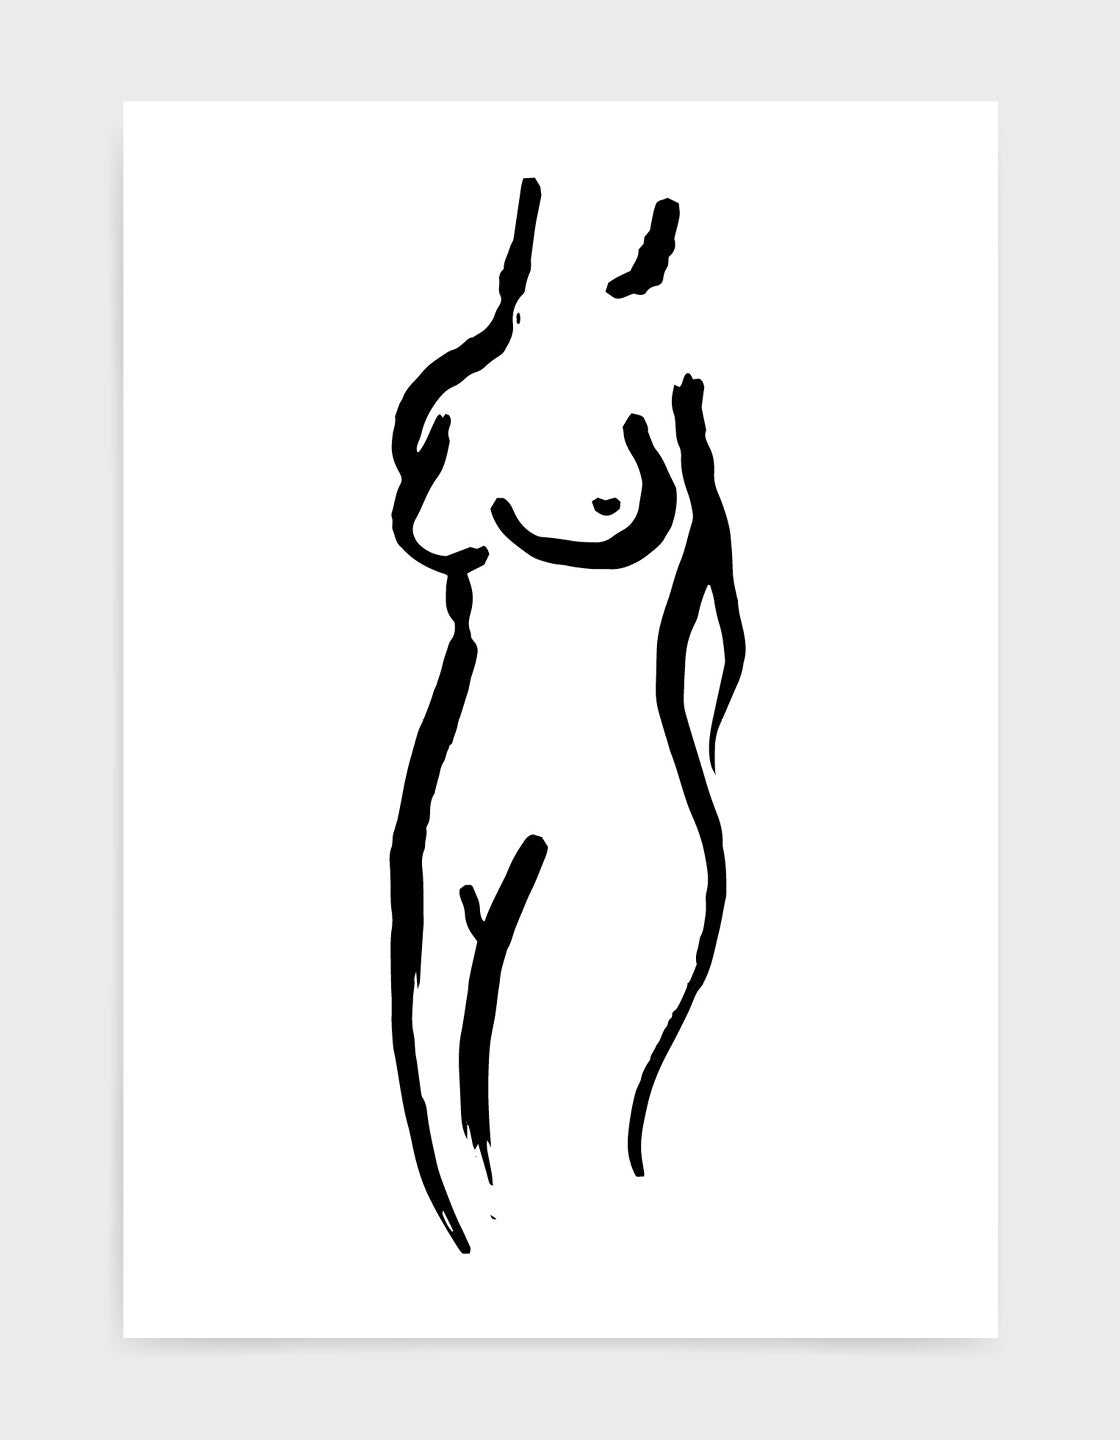 hand drawn black line drawing of a female torso, neck and upper legs against a white background